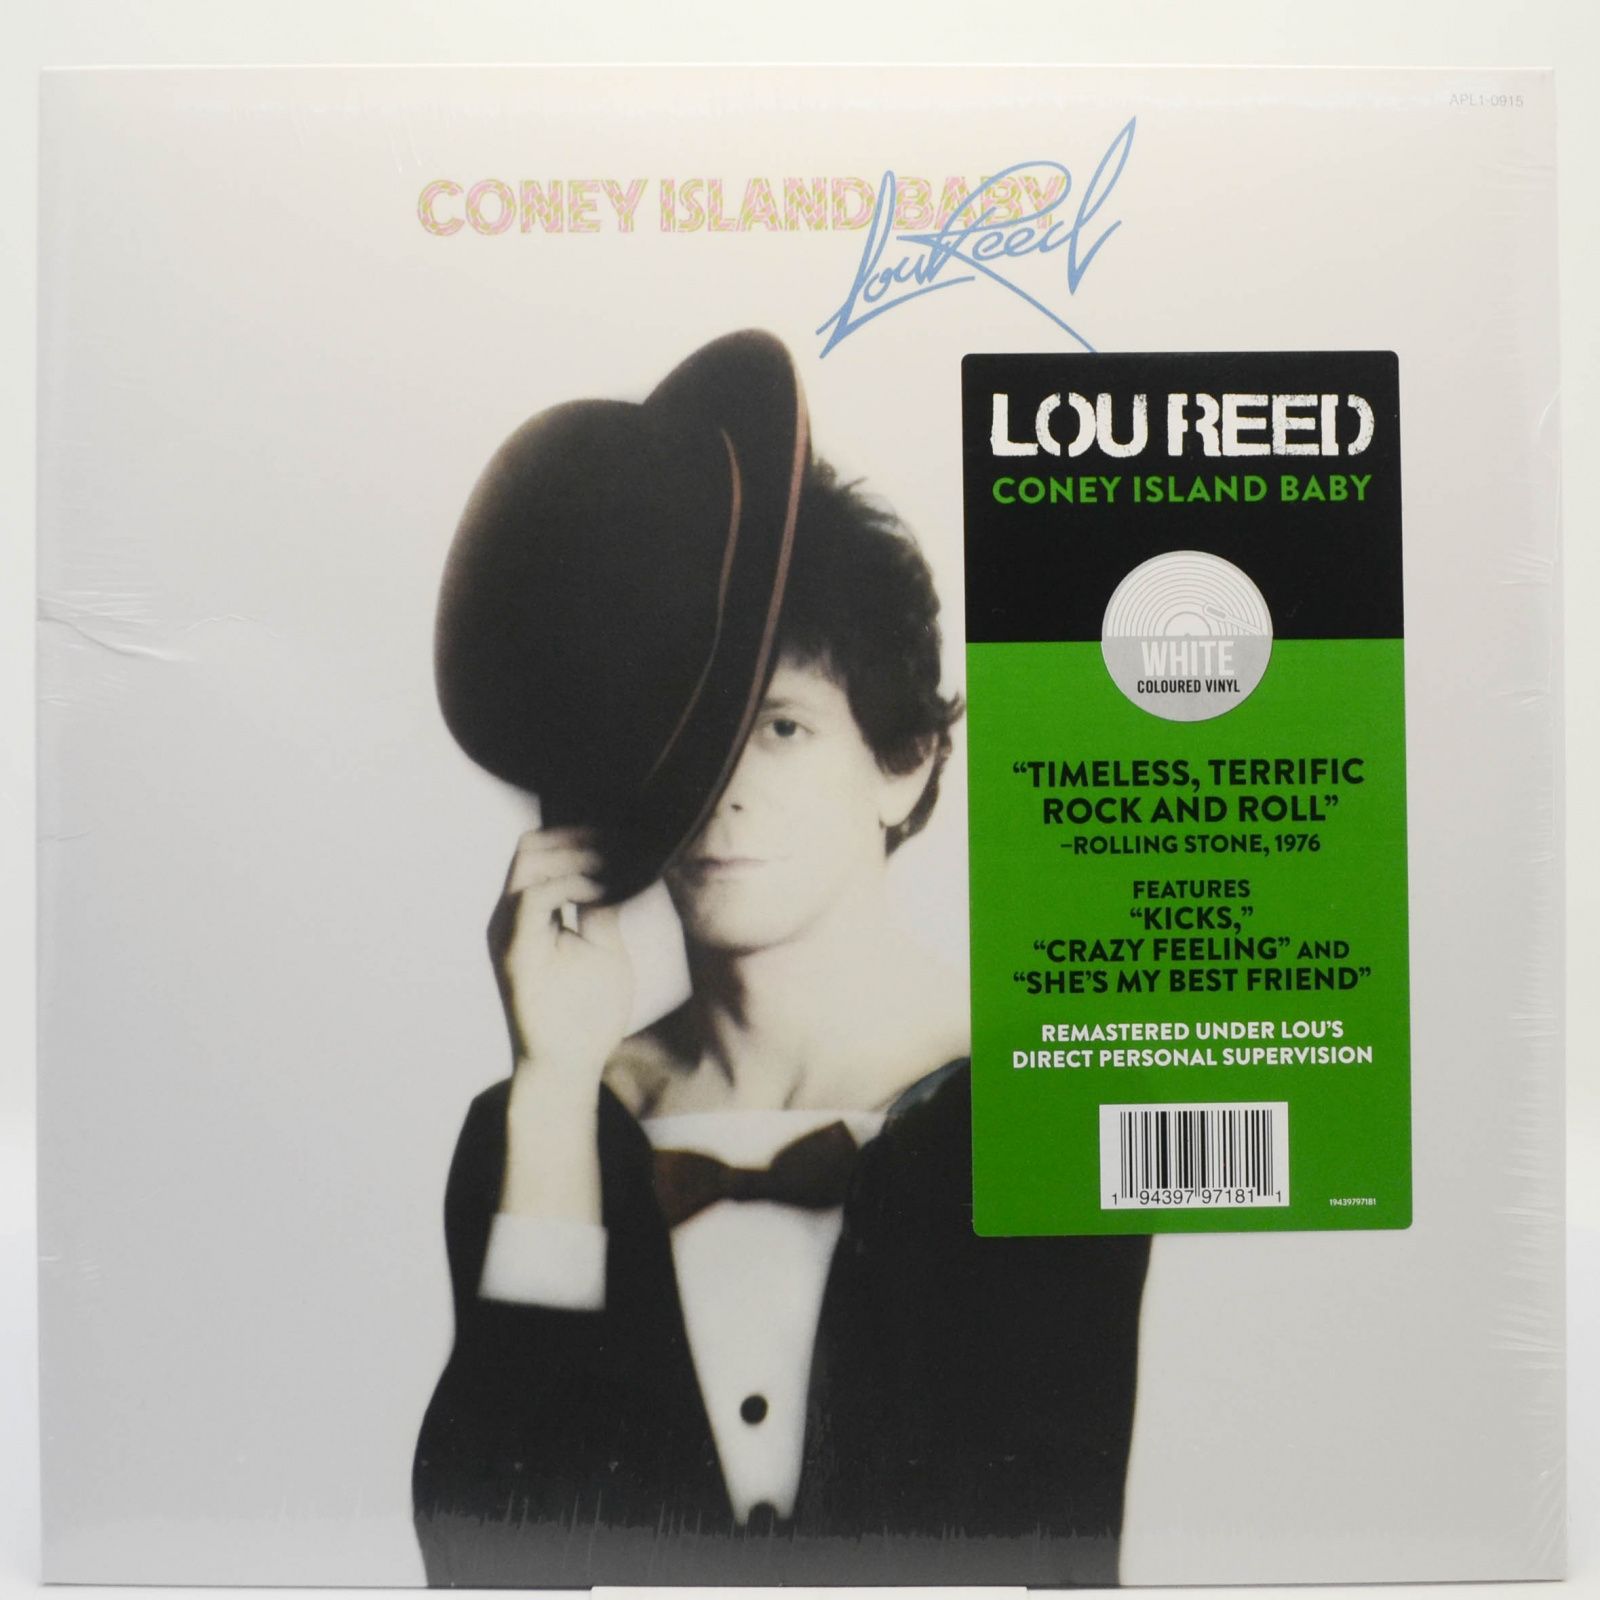 Lou Reed — Coney Island Baby, 1975